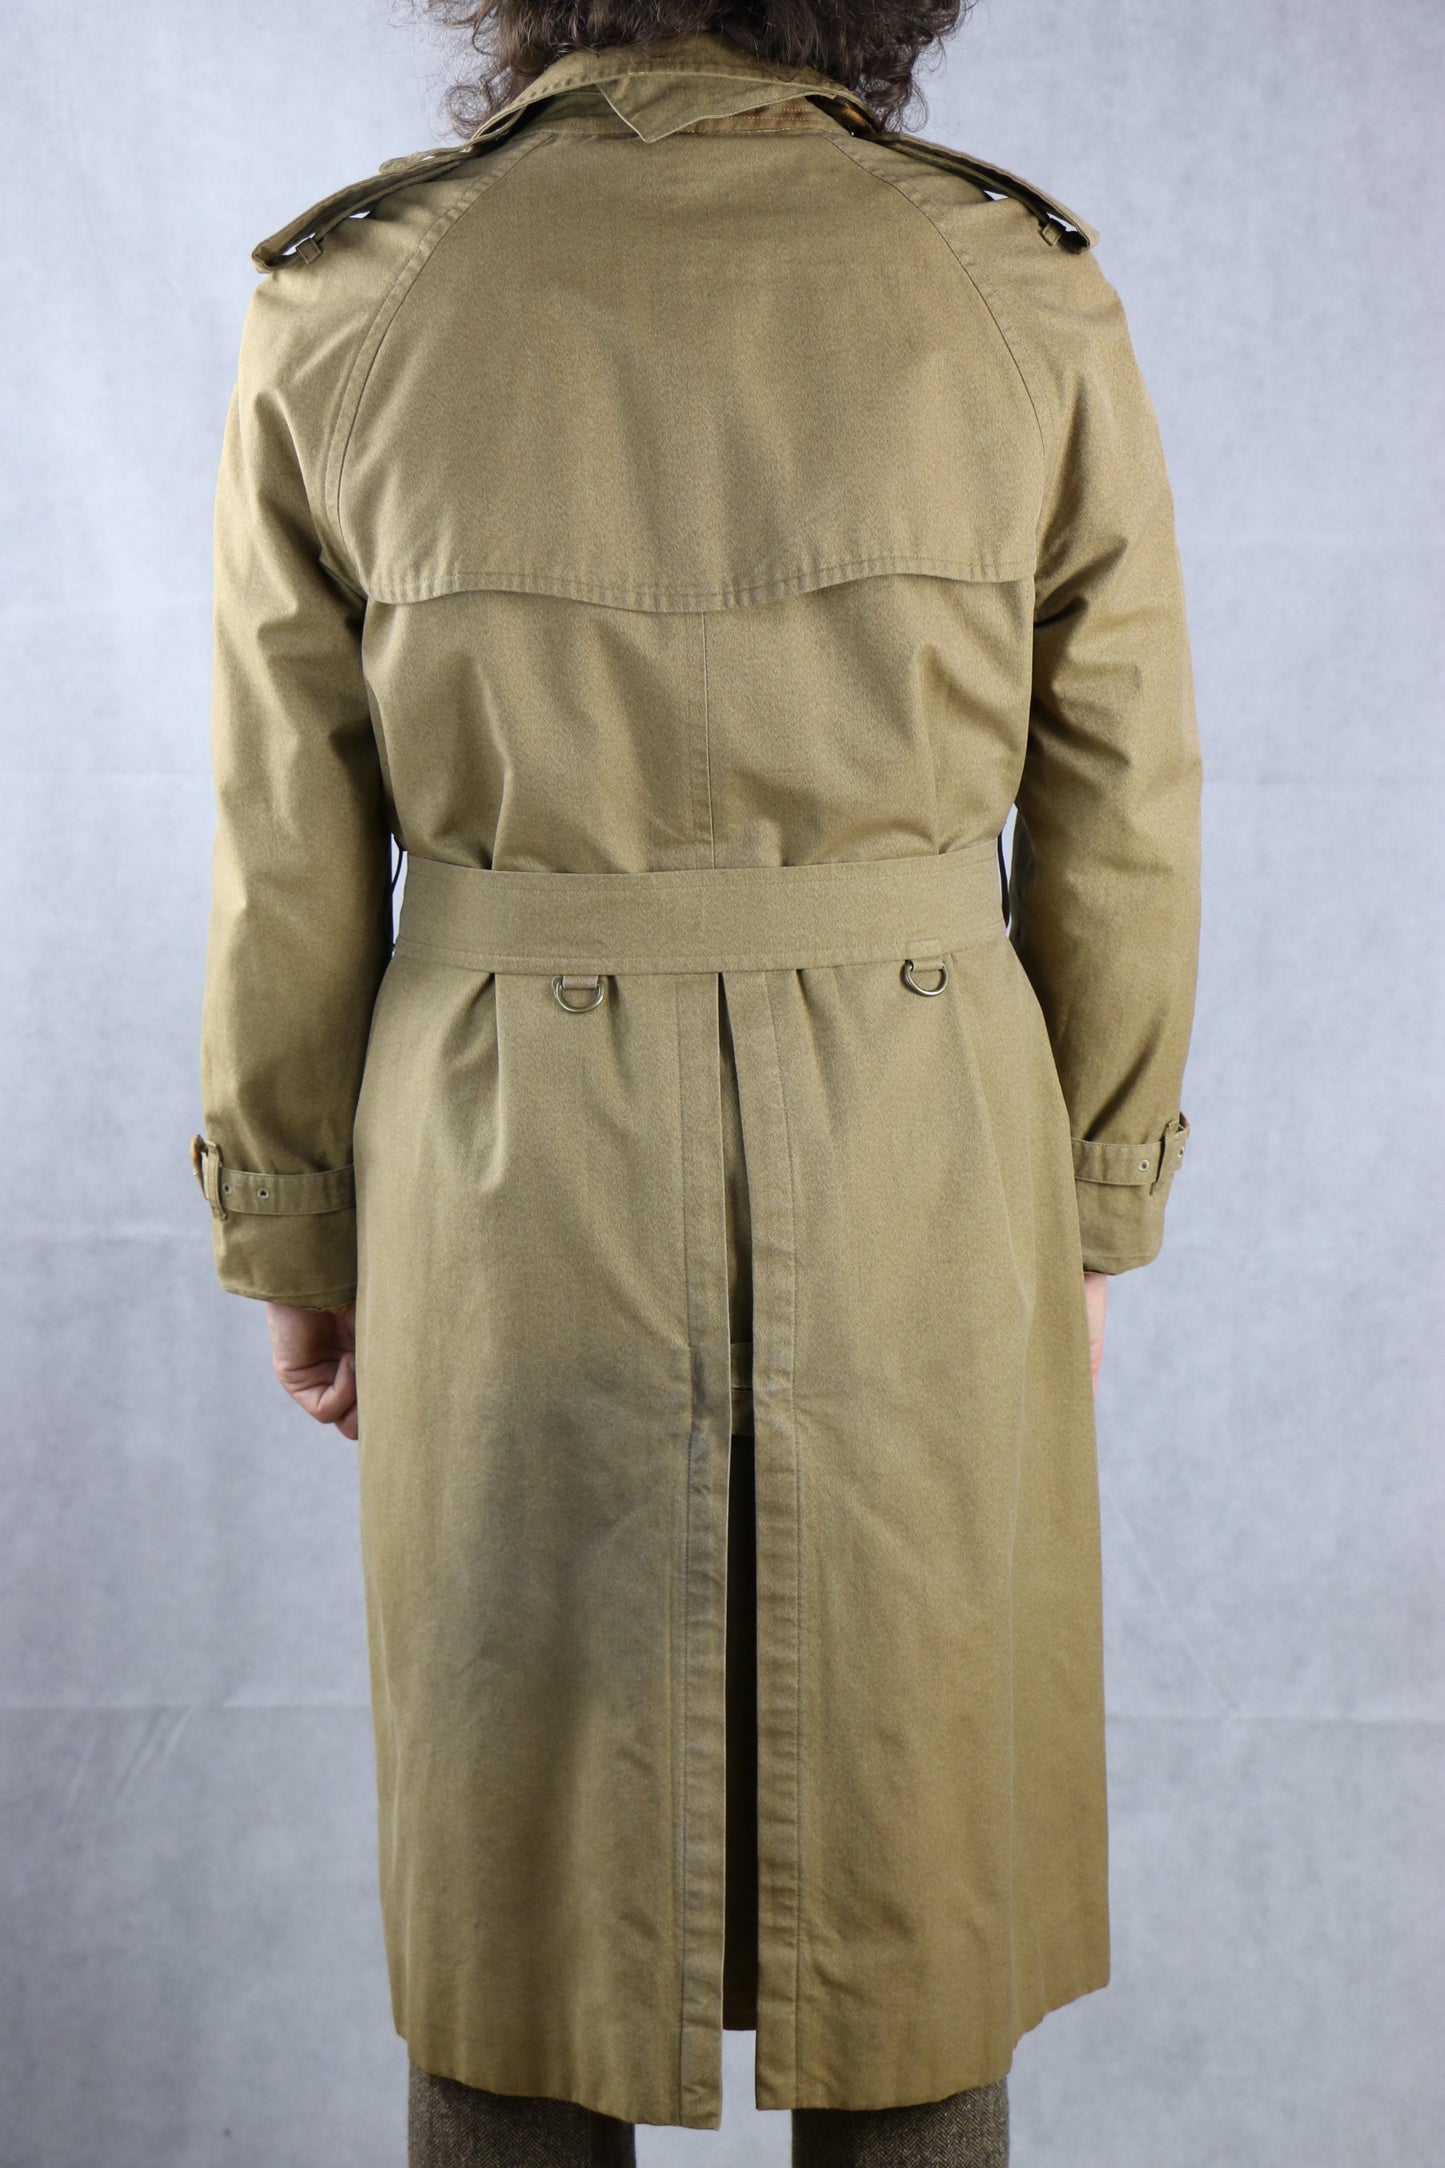 Burberry's Made in England Trench Coat, clochard92.com